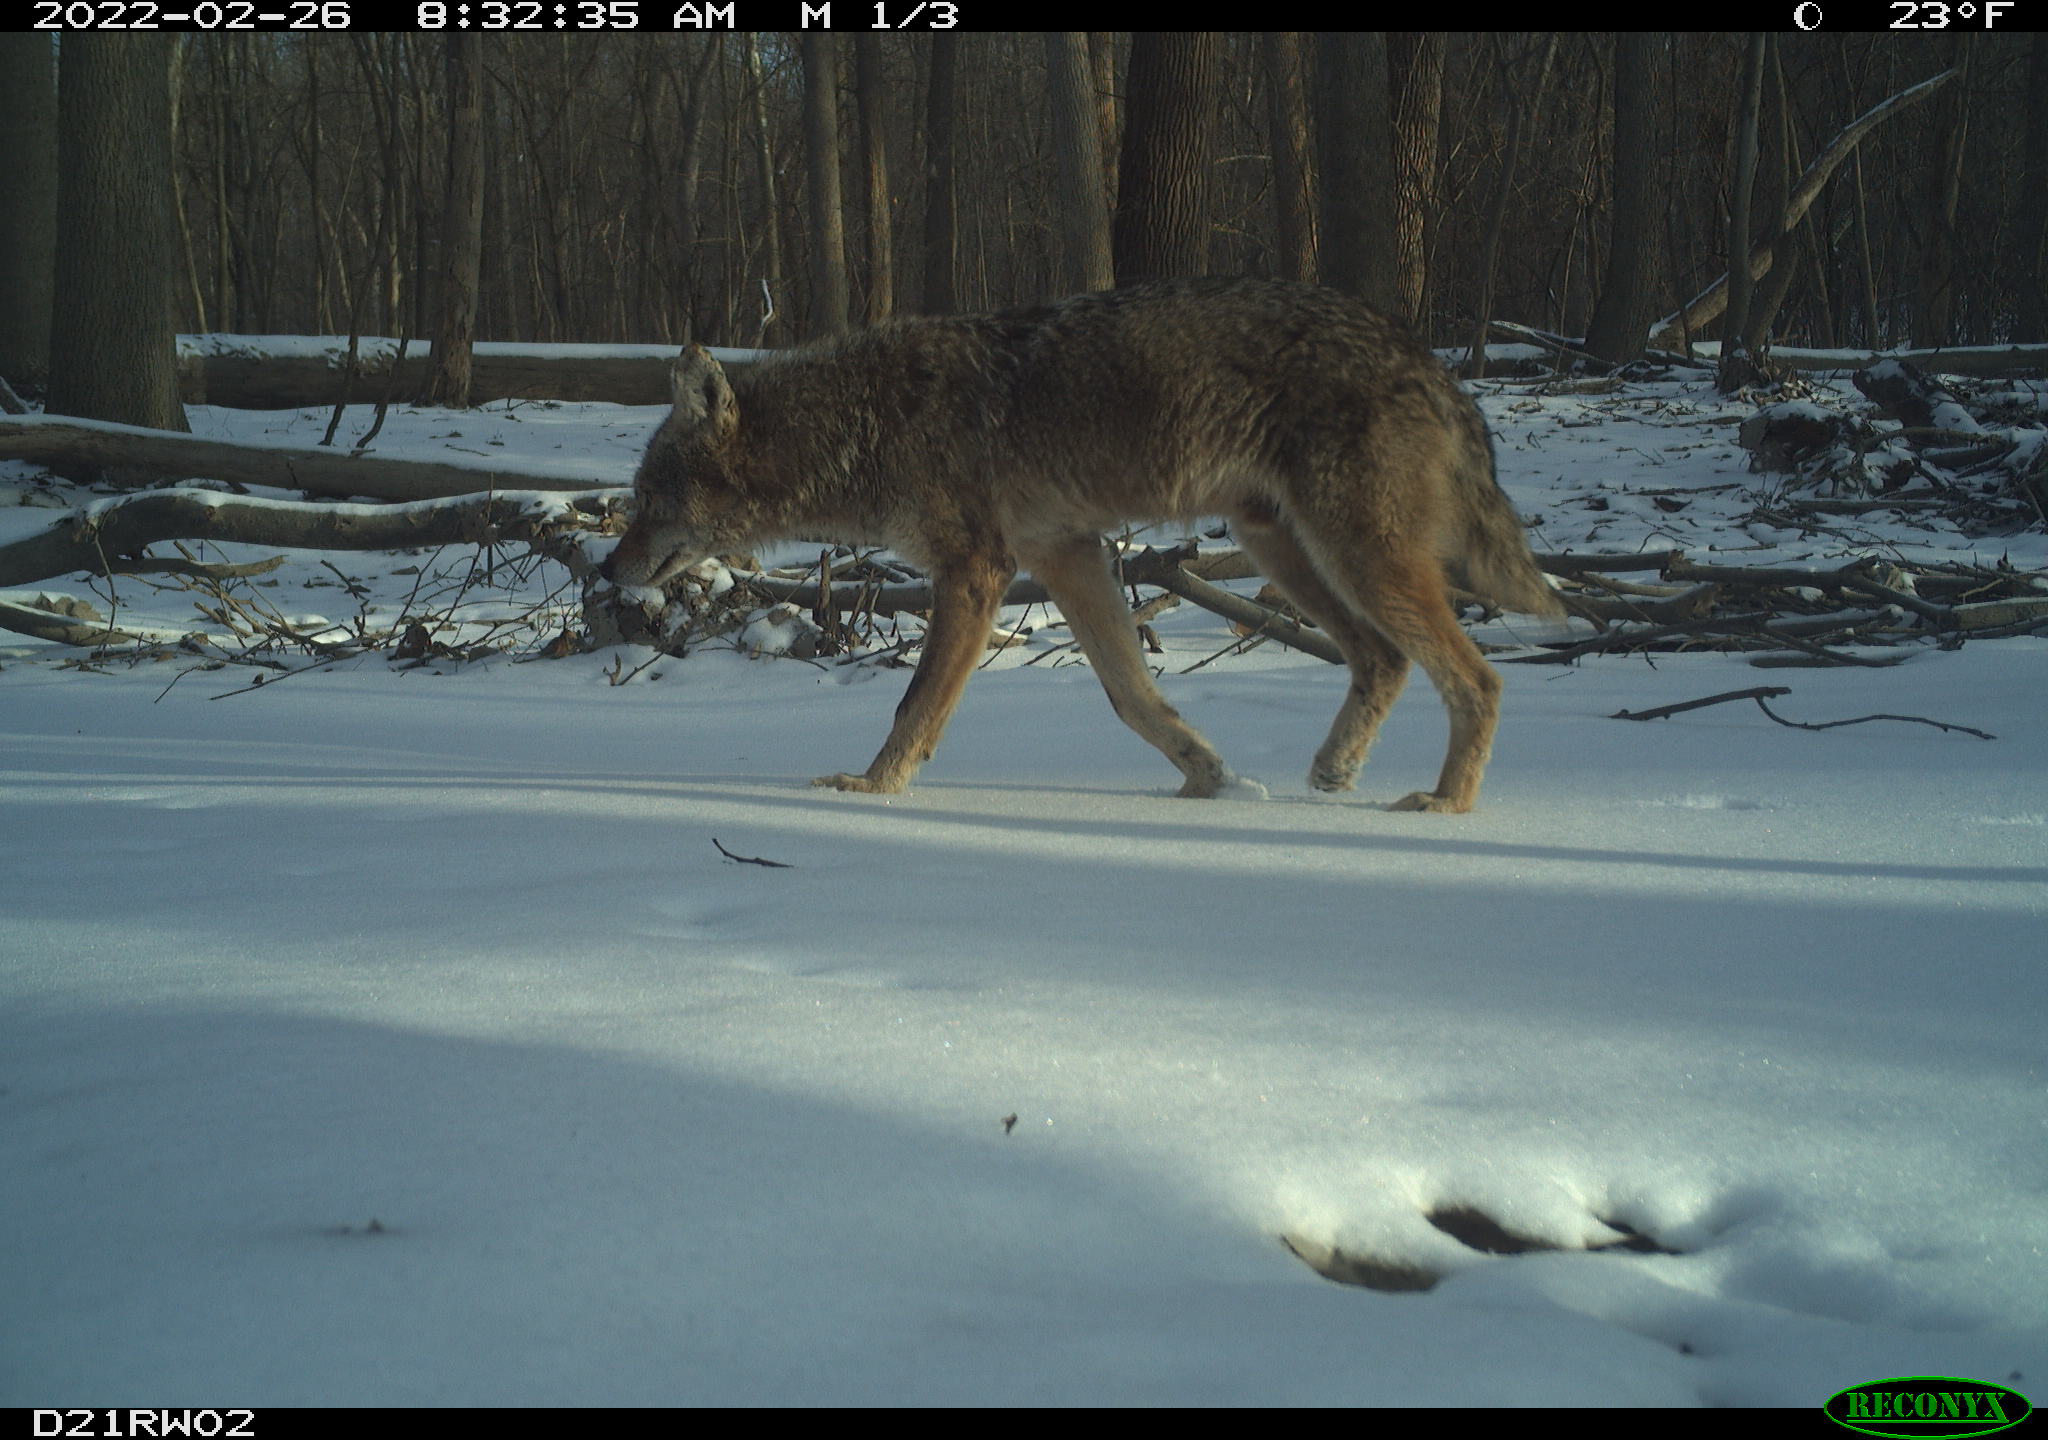 Image of coyote taken on research camera in Detroit park.